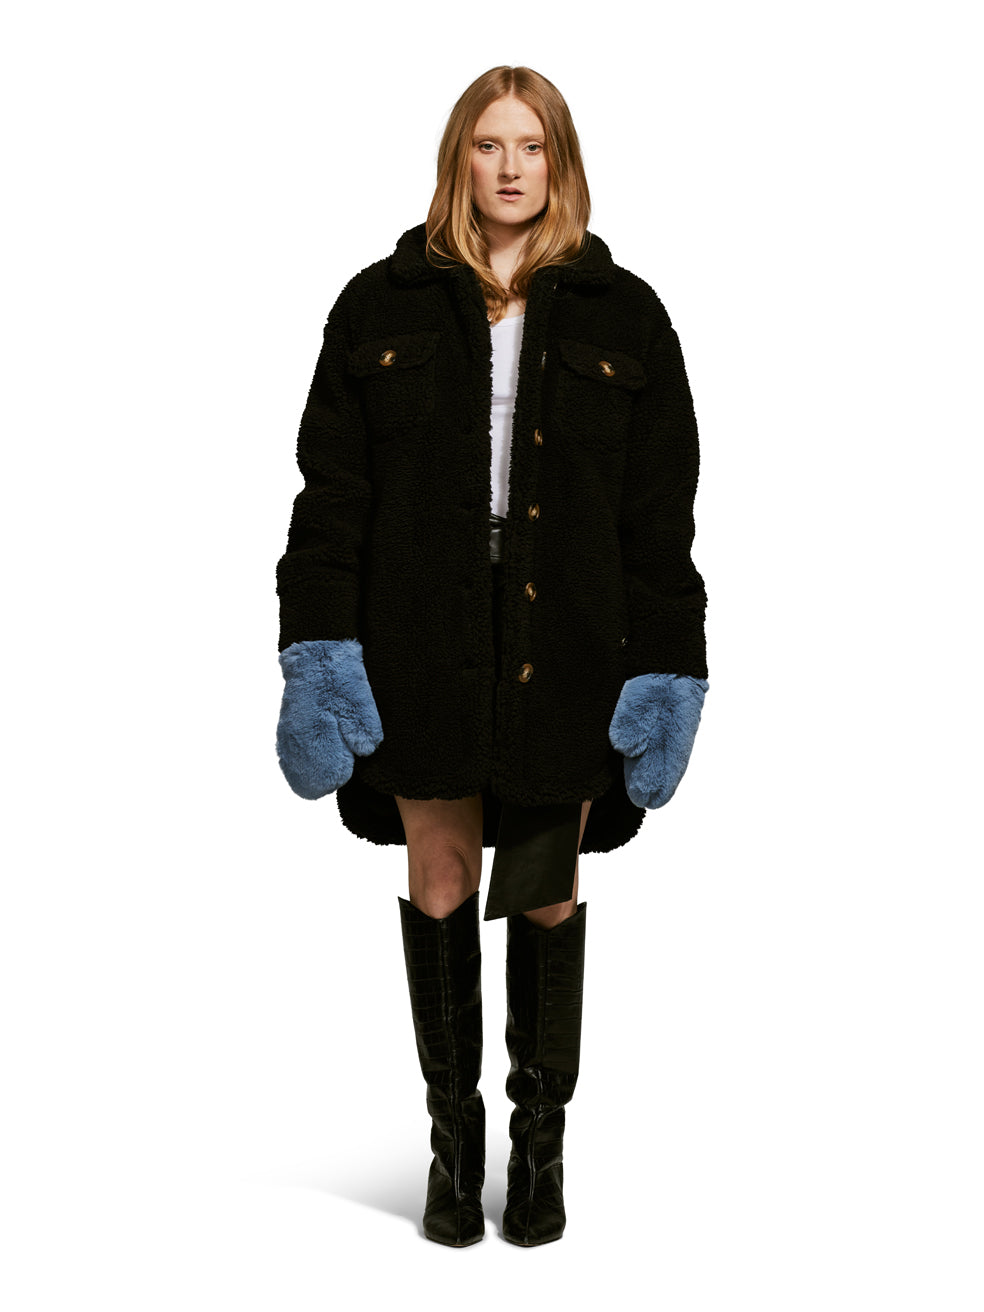 Model wearing the Ash, a teddy-inspired faux-fur sherpa shell with a laid-back silhouette in Charcoal.